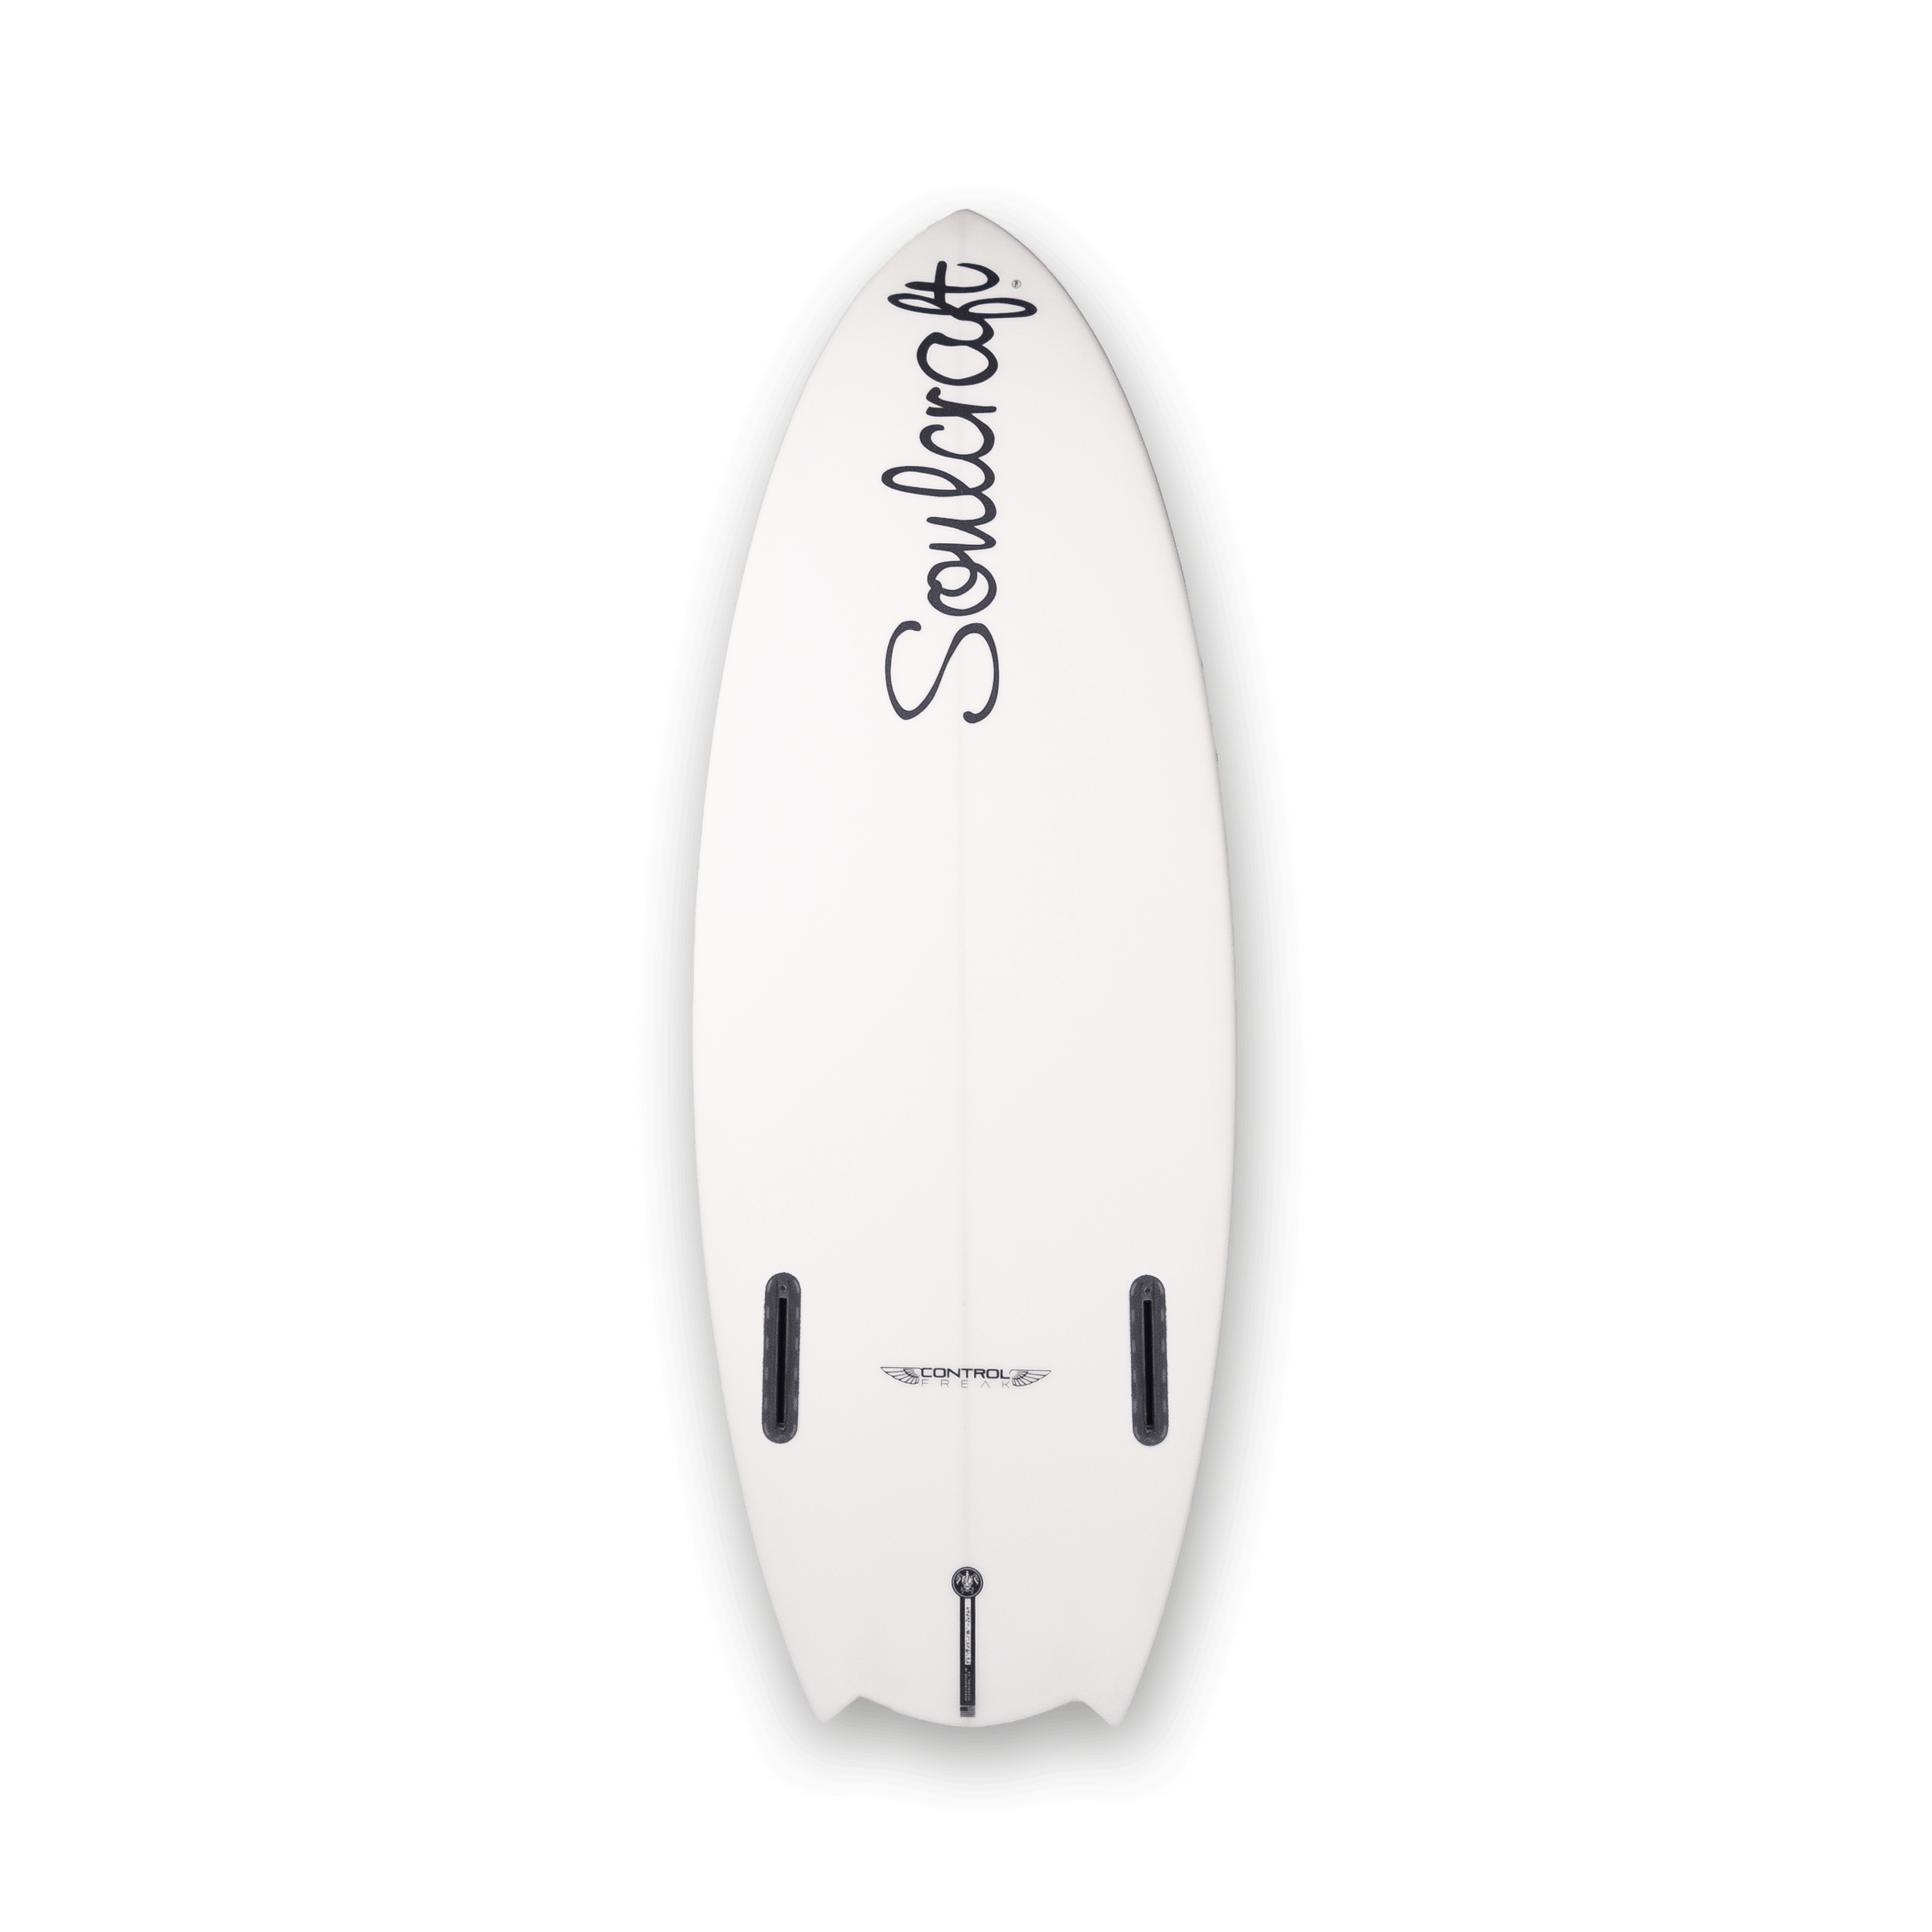 A Soulcraft Control Freak Wakesurf Board offering speed generation and control for intermediate riders on a striking black background.